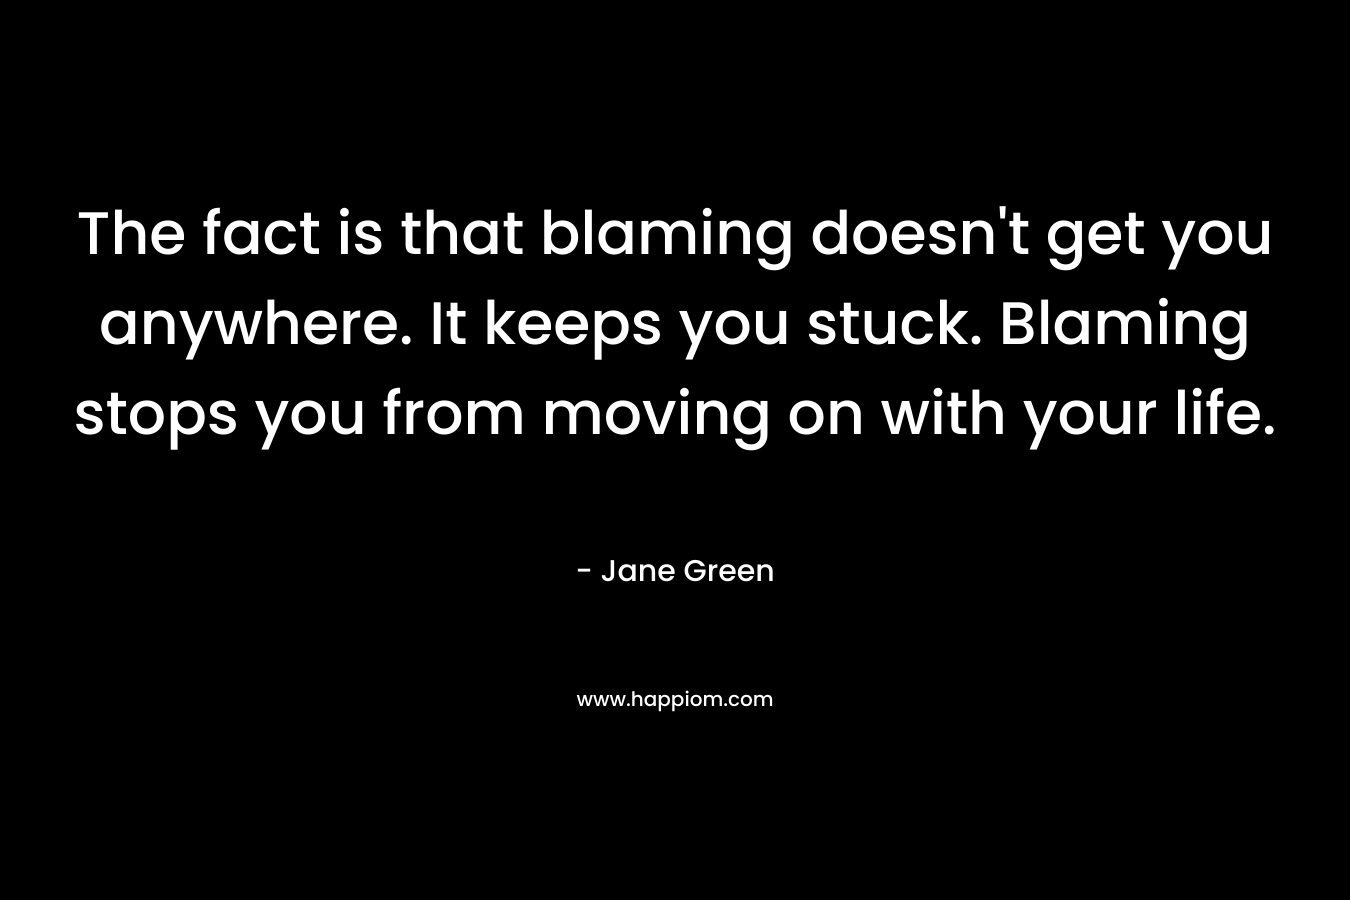 The fact is that blaming doesn't get you anywhere. It keeps you stuck. Blaming stops you from moving on with your life.